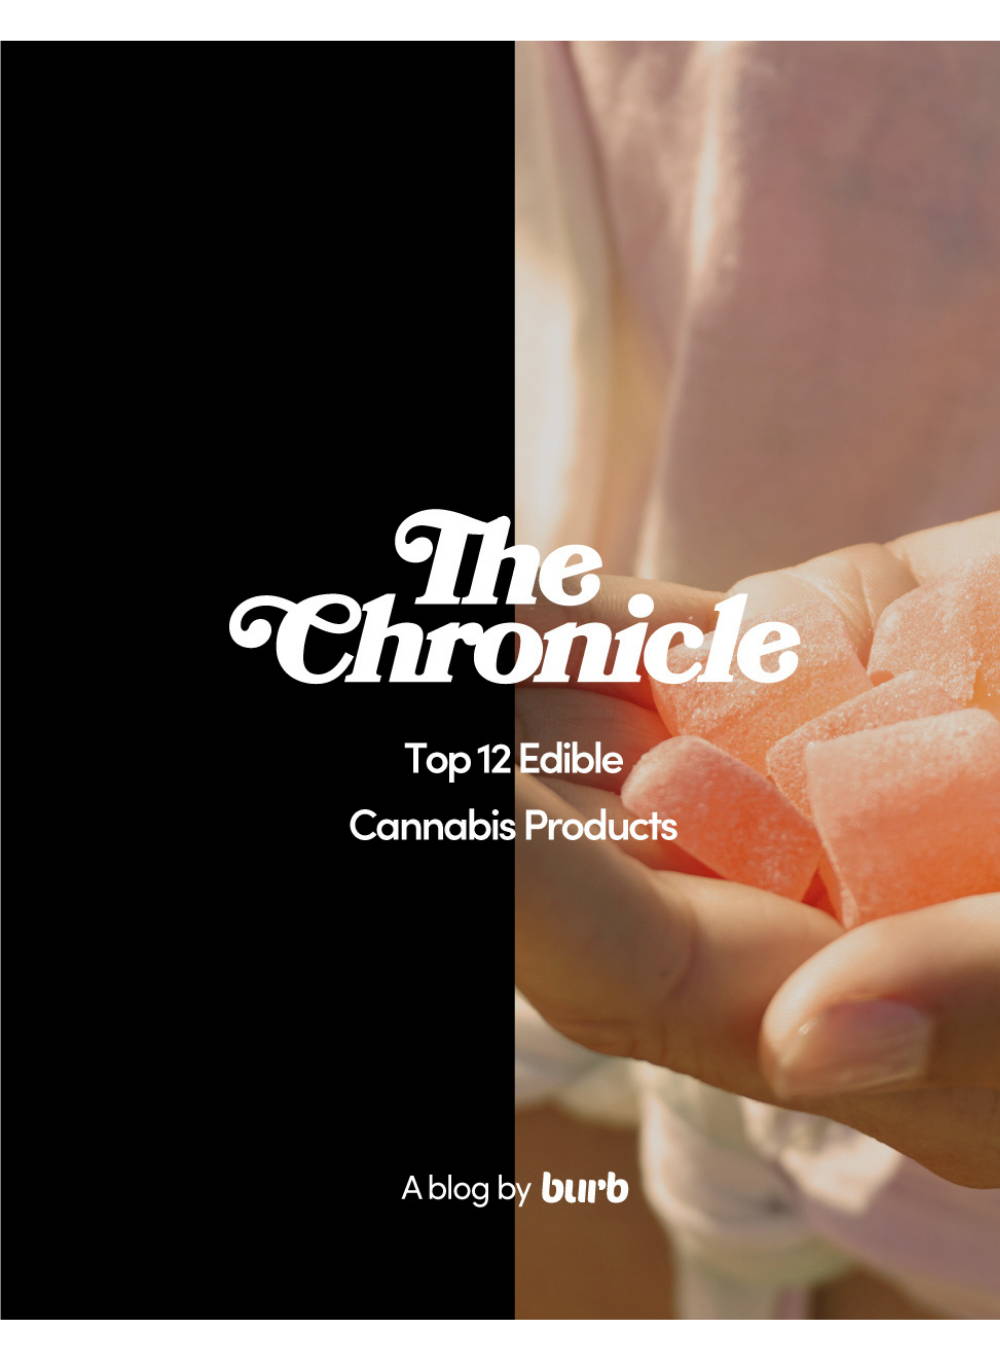 Top 12 Edible Cannabis Products